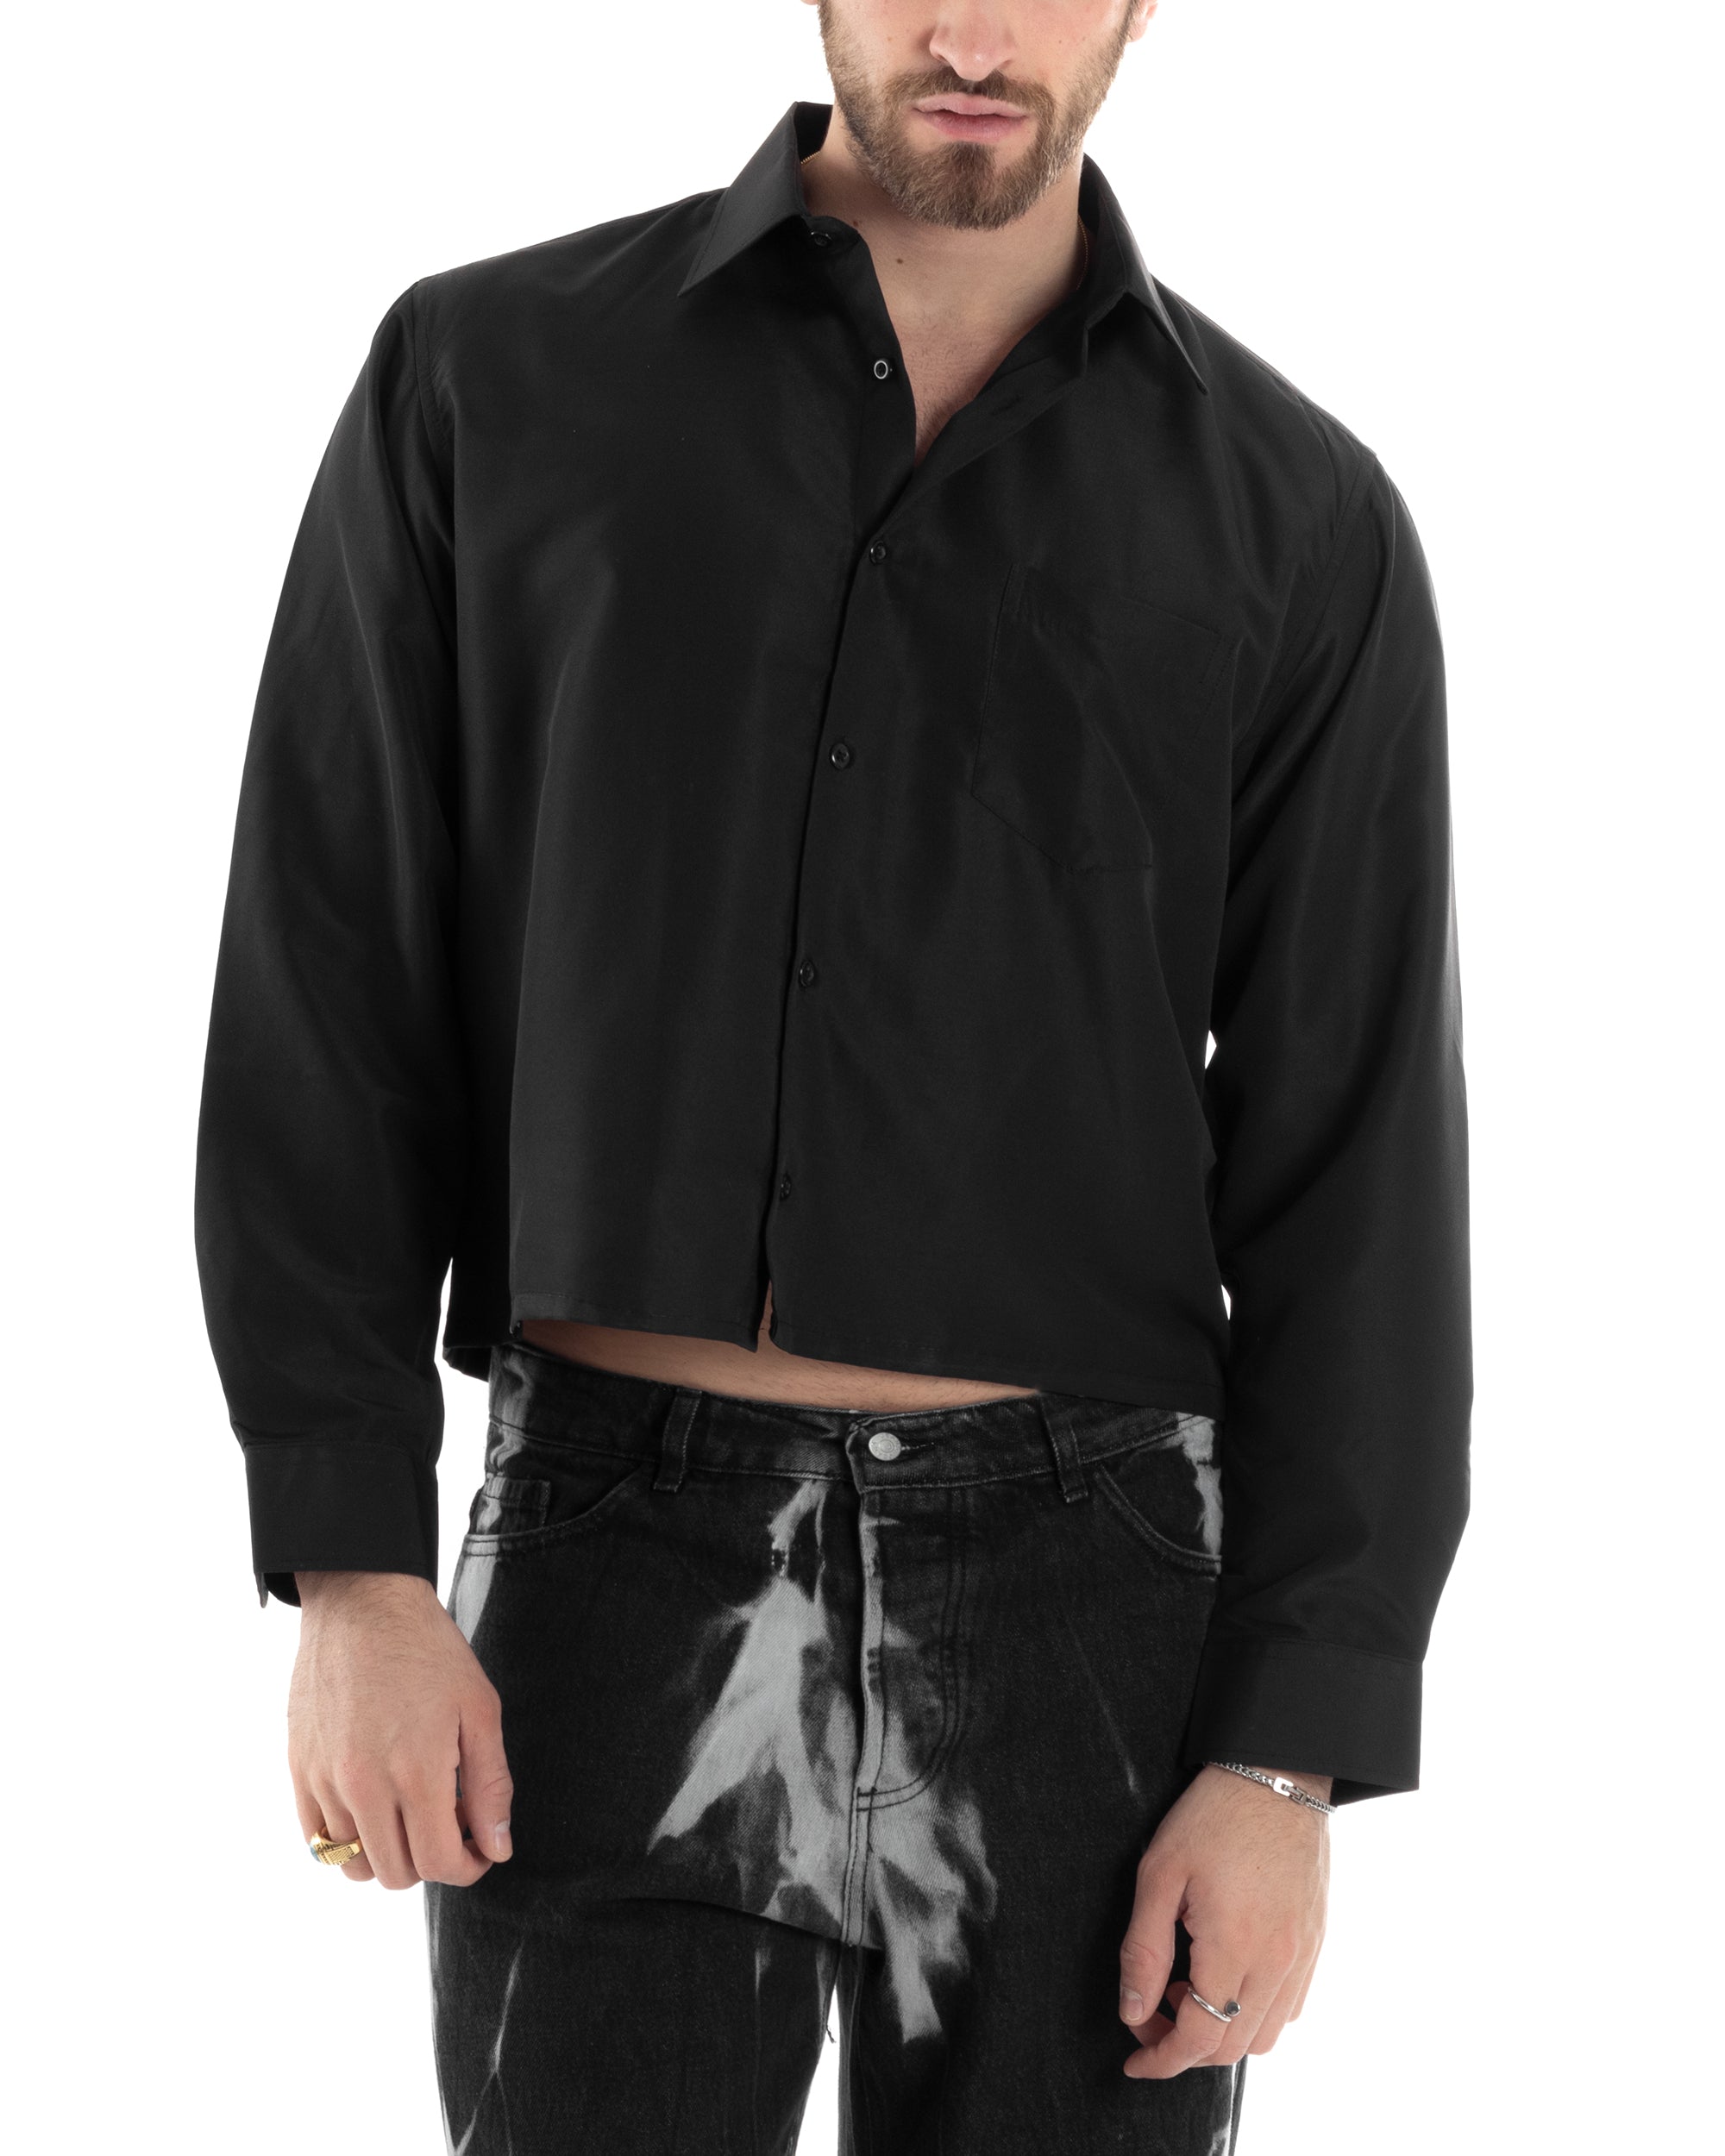 Men's Short Sleeve Shirt Cropped Solid Color Black Boxy Fit Casual GIOSAL-CC1175A